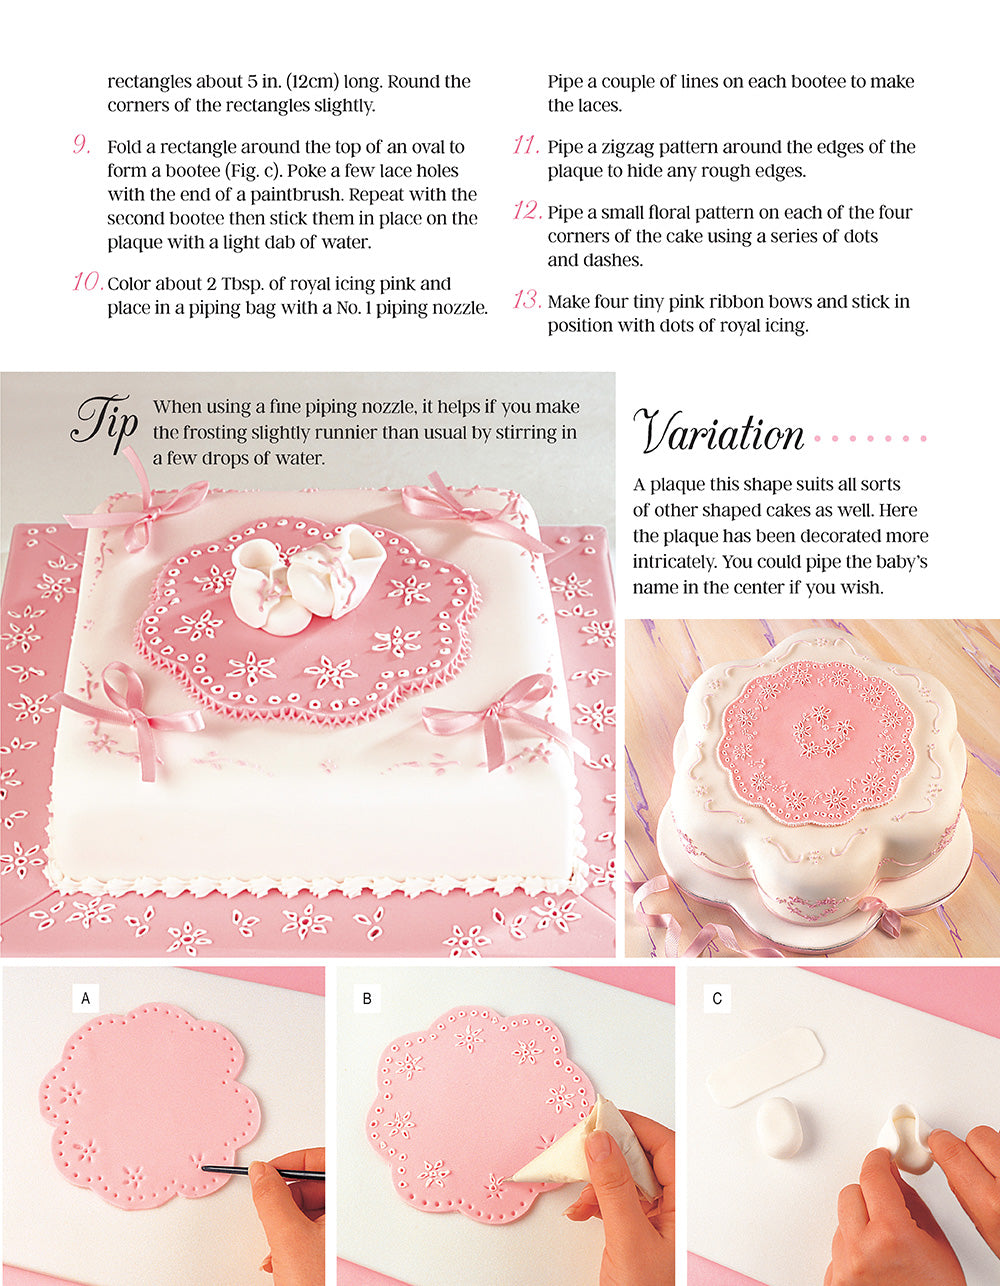 Step-by-Step Guide: How to Make 3-D Fondant Letters for Cake Decorating :  u/Drmummycakes